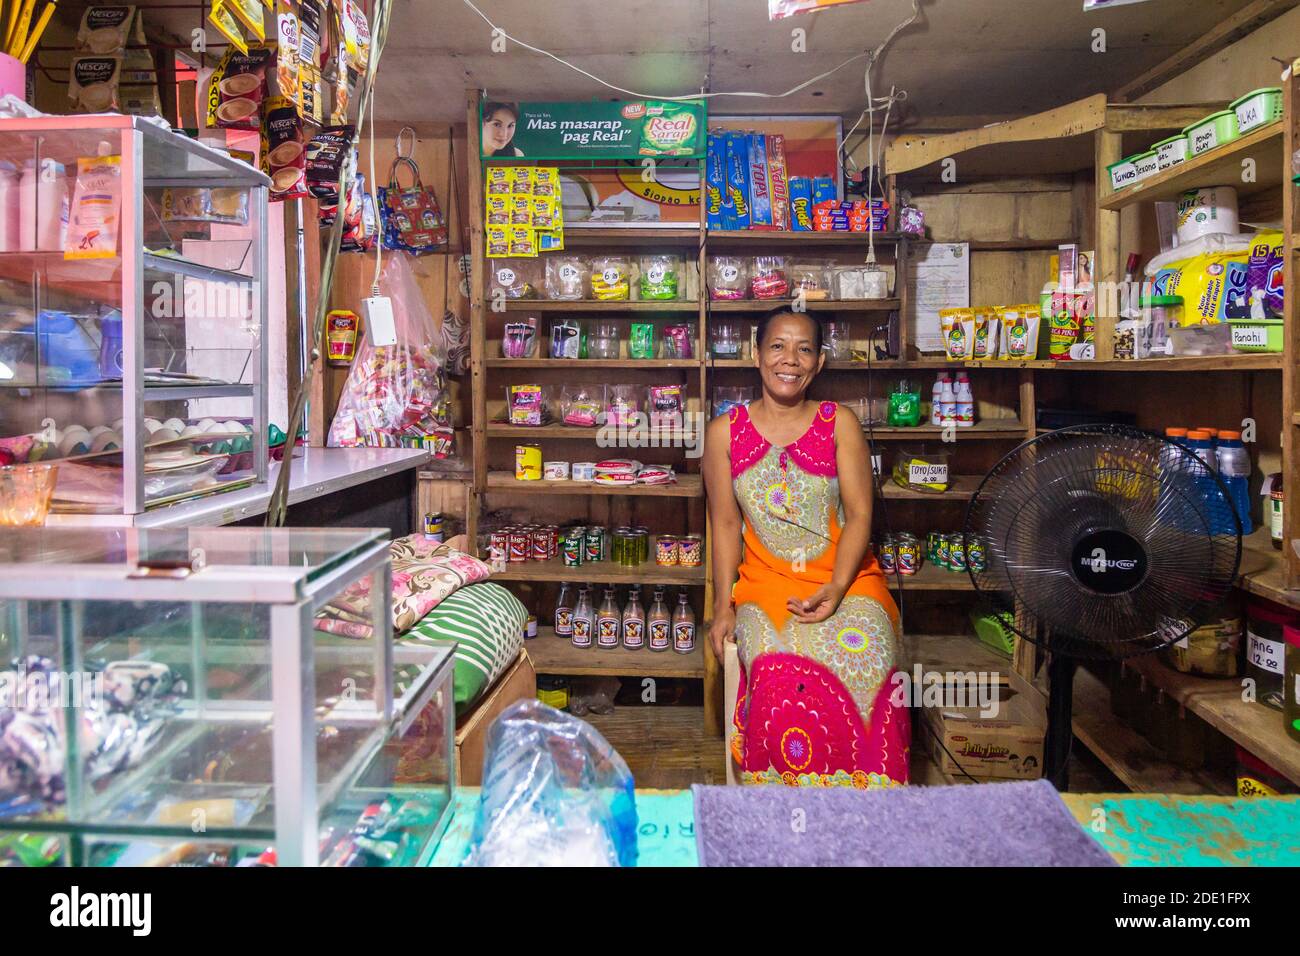 An owner smiling inside her home store locally called sari--sari store in Batangas, Philippines Stock Photo